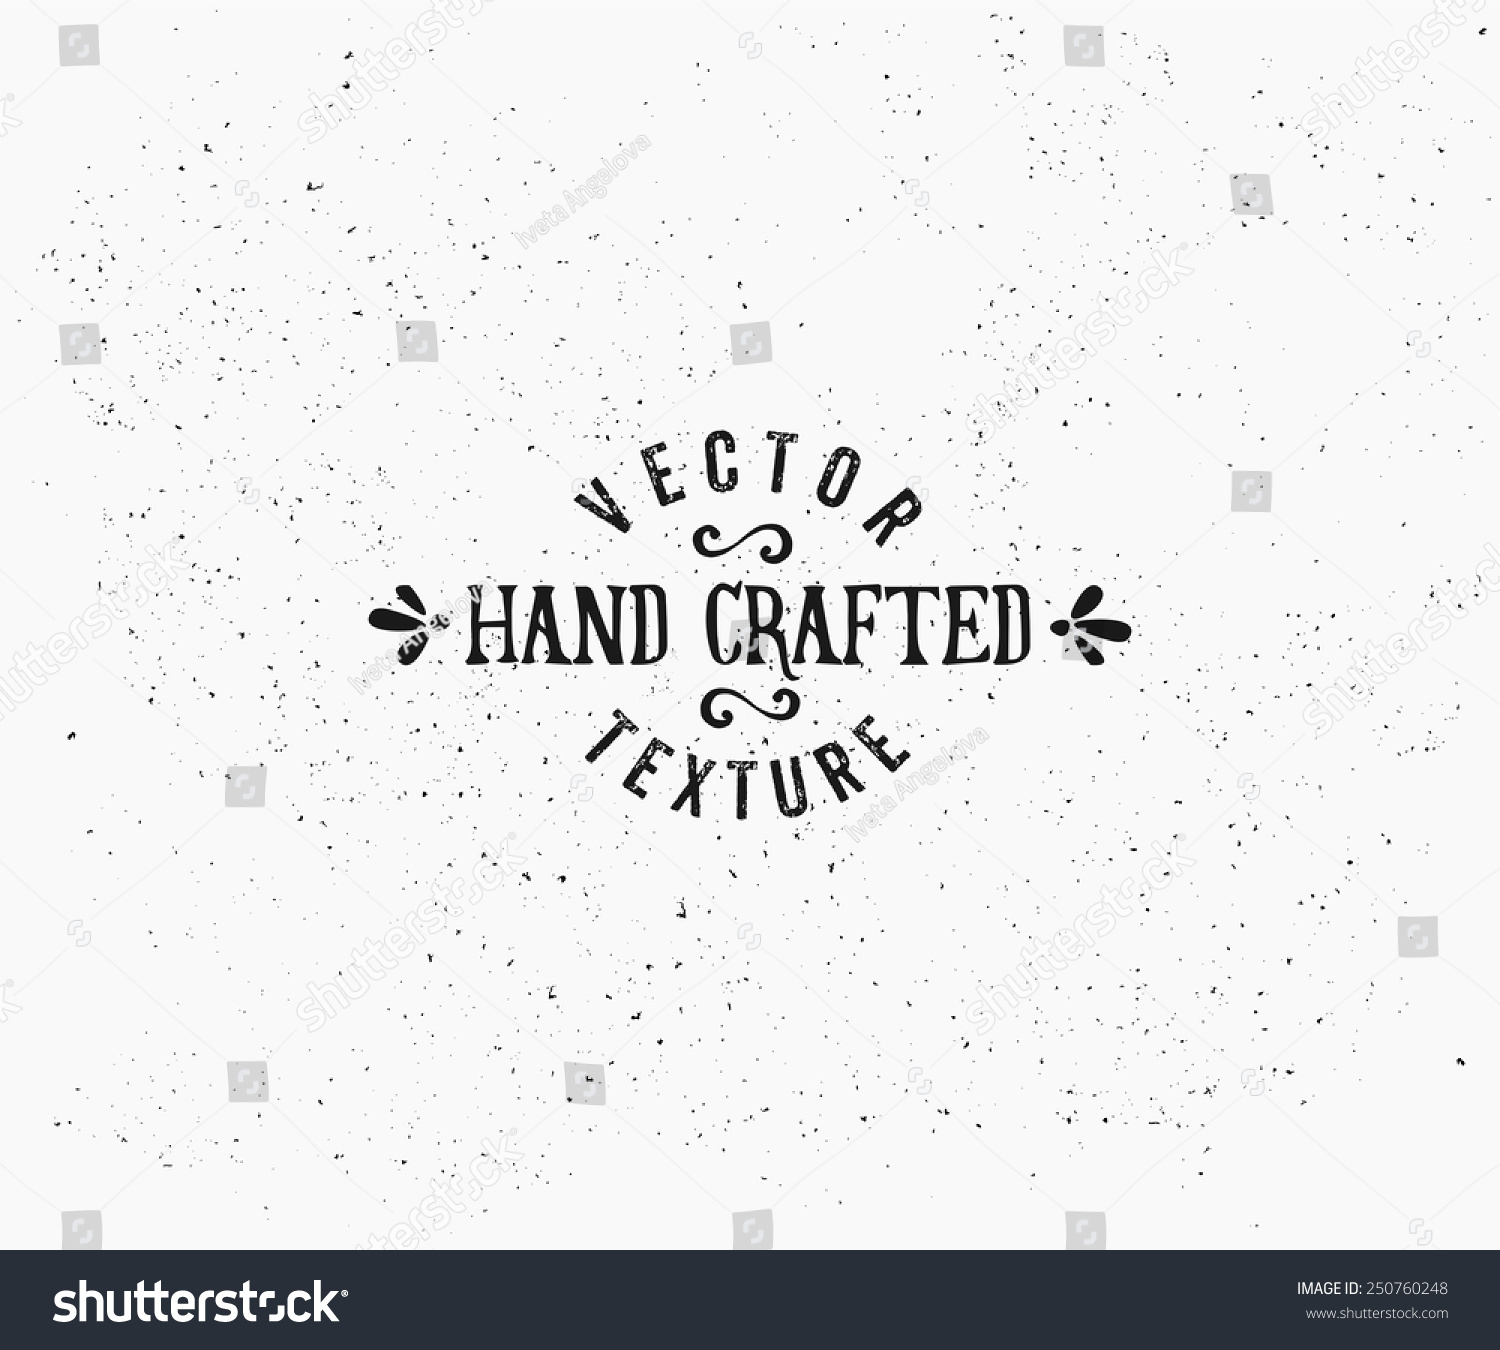 Subtle vintage texture in black and white. Vector textured effect. Retro style insignia design. #250760248